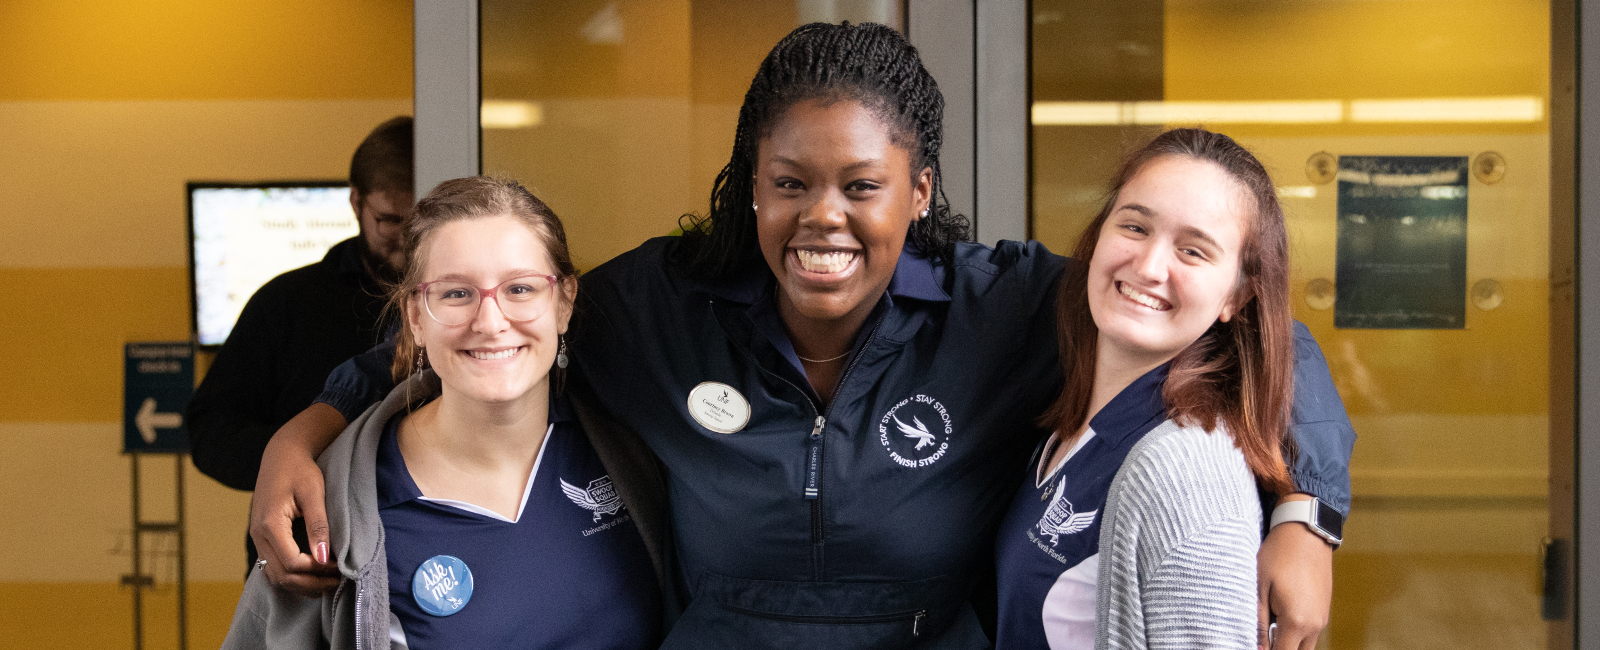 Three female student workers bundled together in UNF attire and smiling